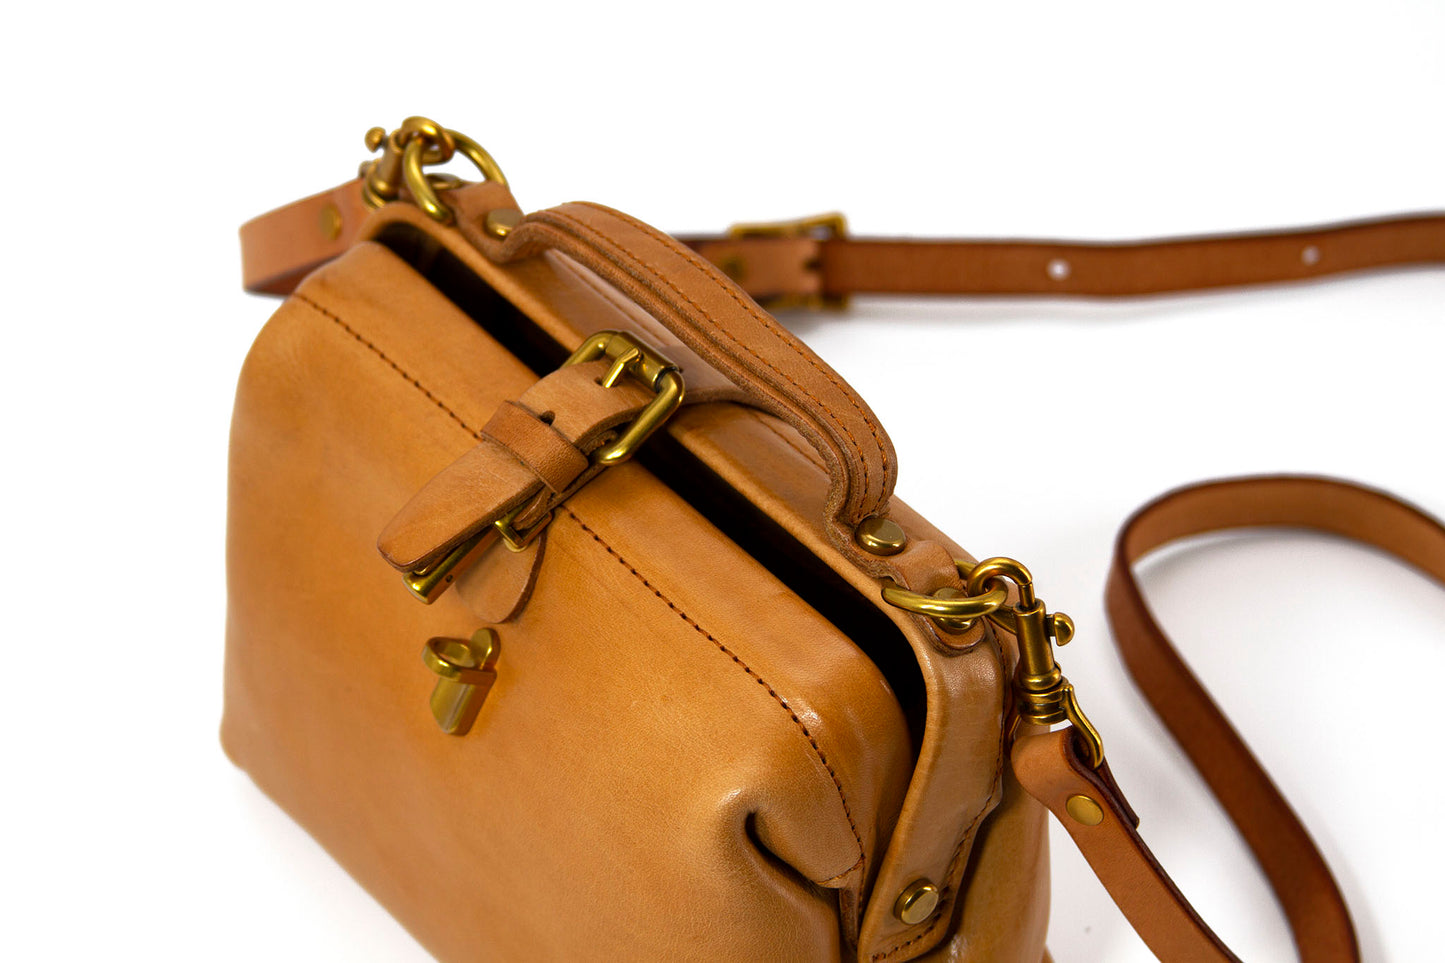 The small supple leather Dulles bag